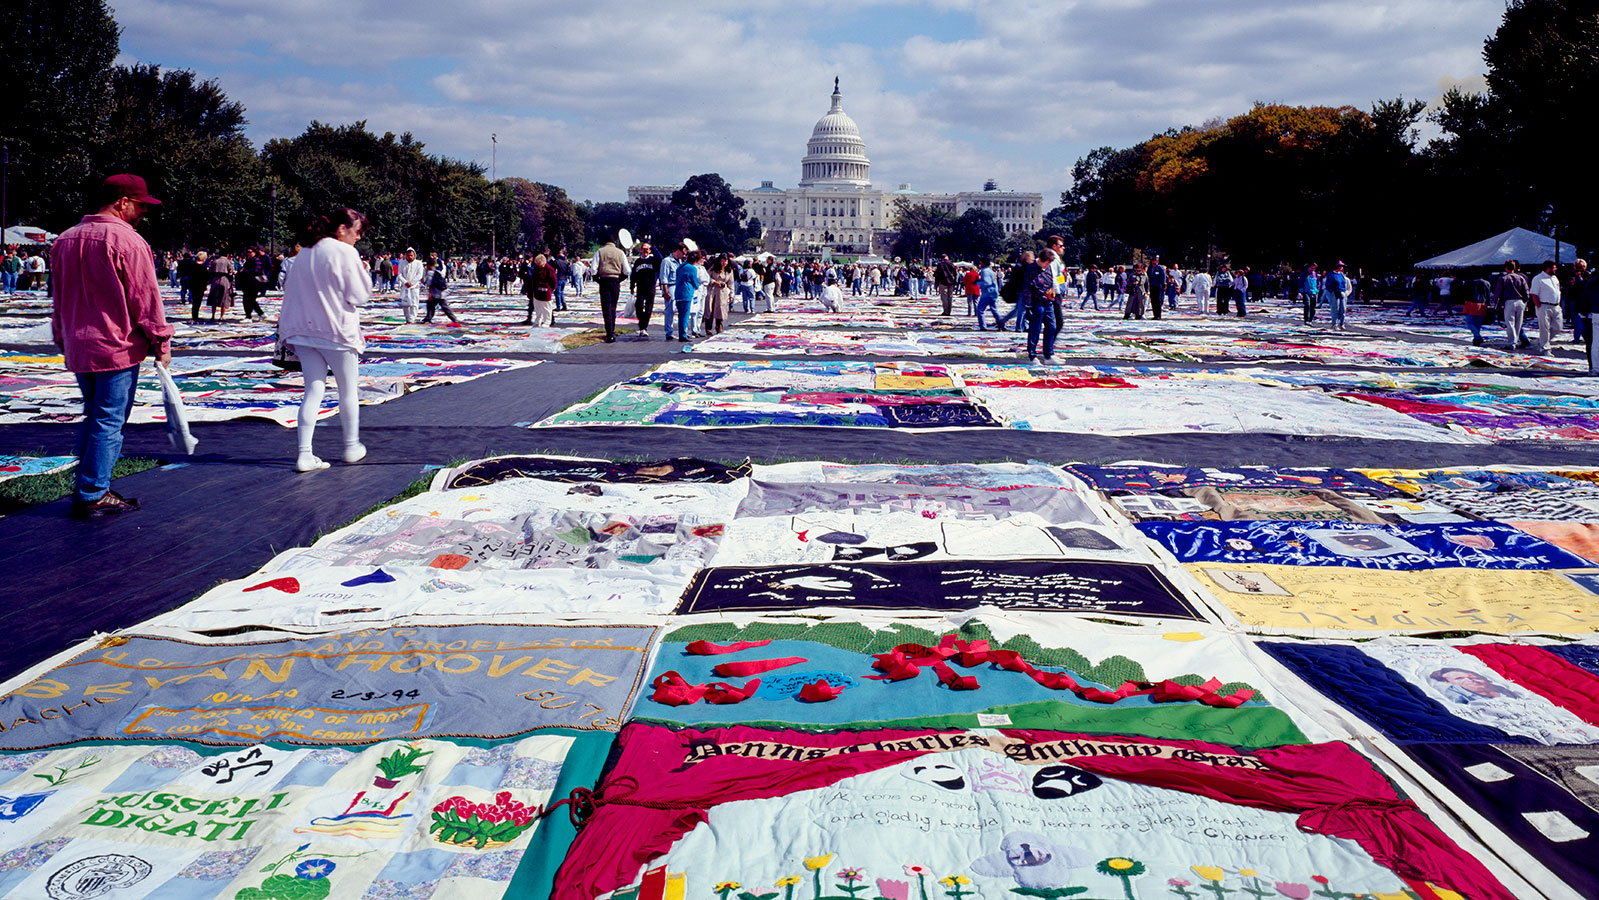 The AIDS Memorial Quilt on display on the National Mall in Washington, D.C. in 1987